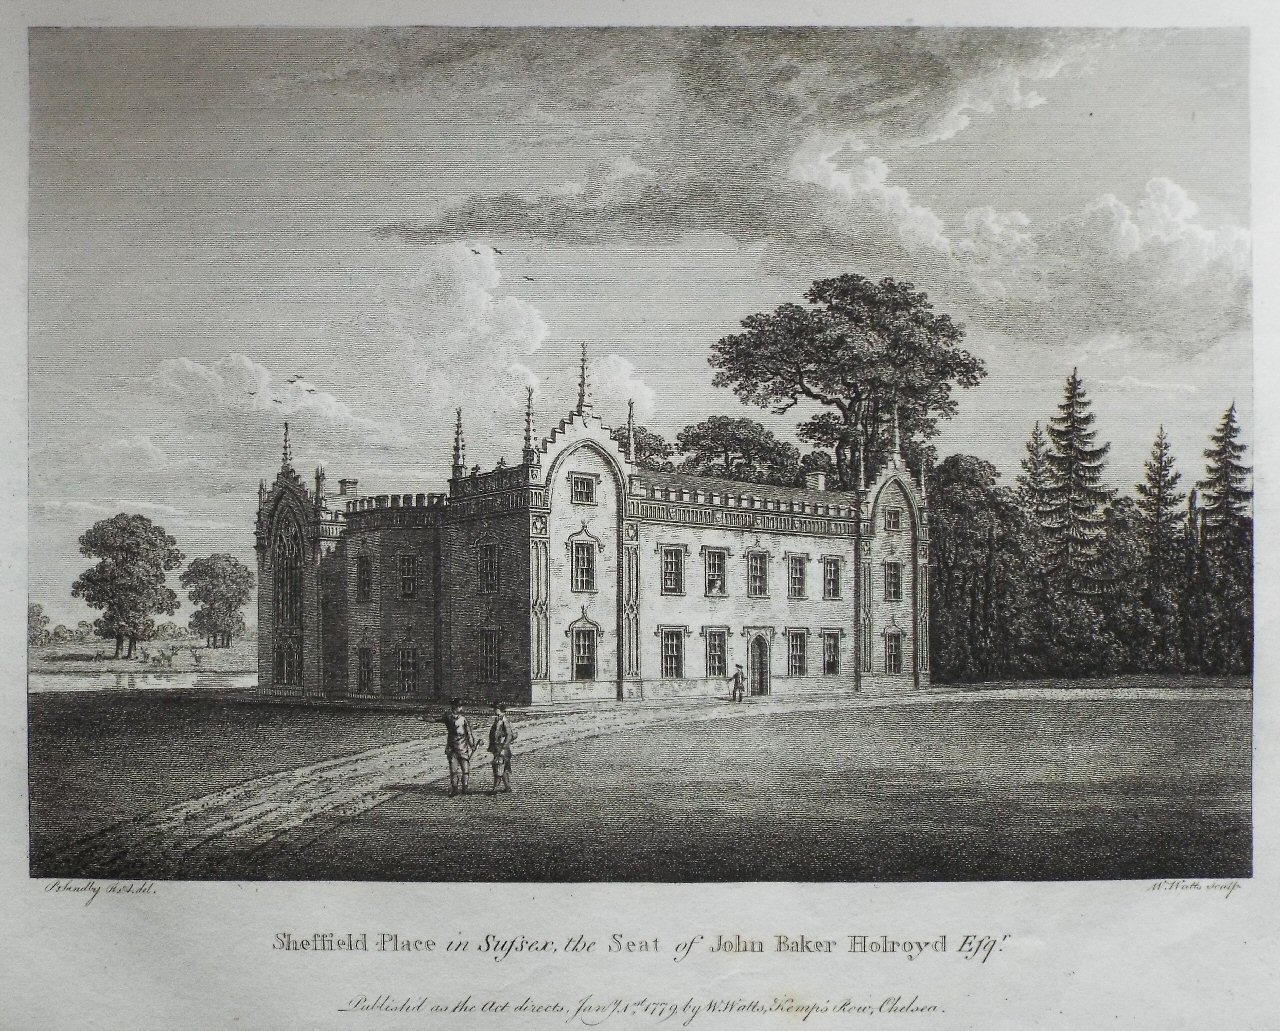 Print - Sheffield Place in Sussex, the Seat of John Baker Holroyd Esqr  - Watts